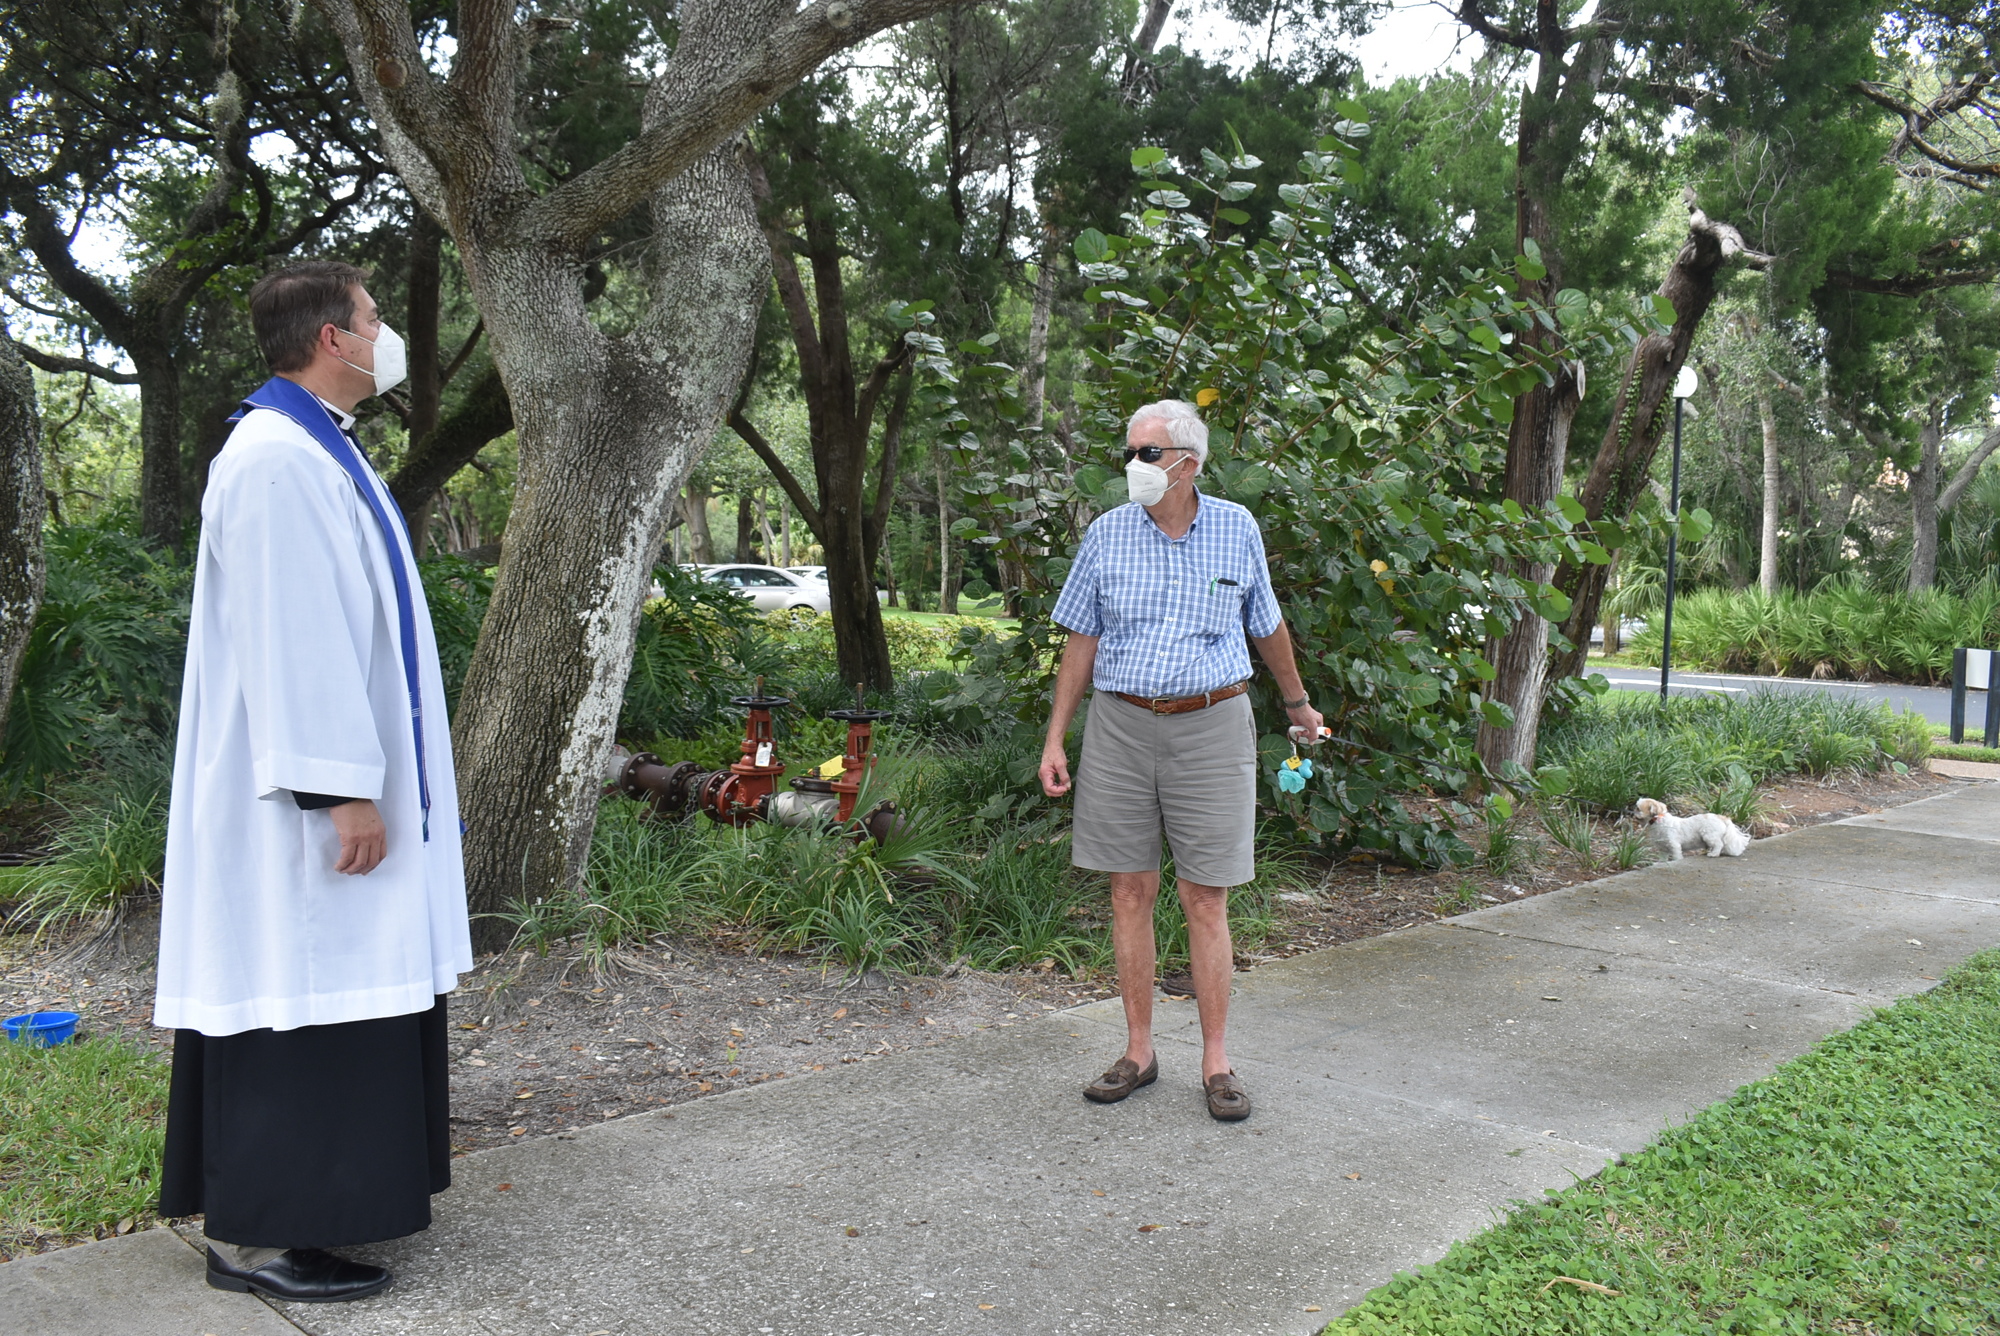 Father Dave Marshall chats with Ed Ortiz as Buddy explores the grounds.